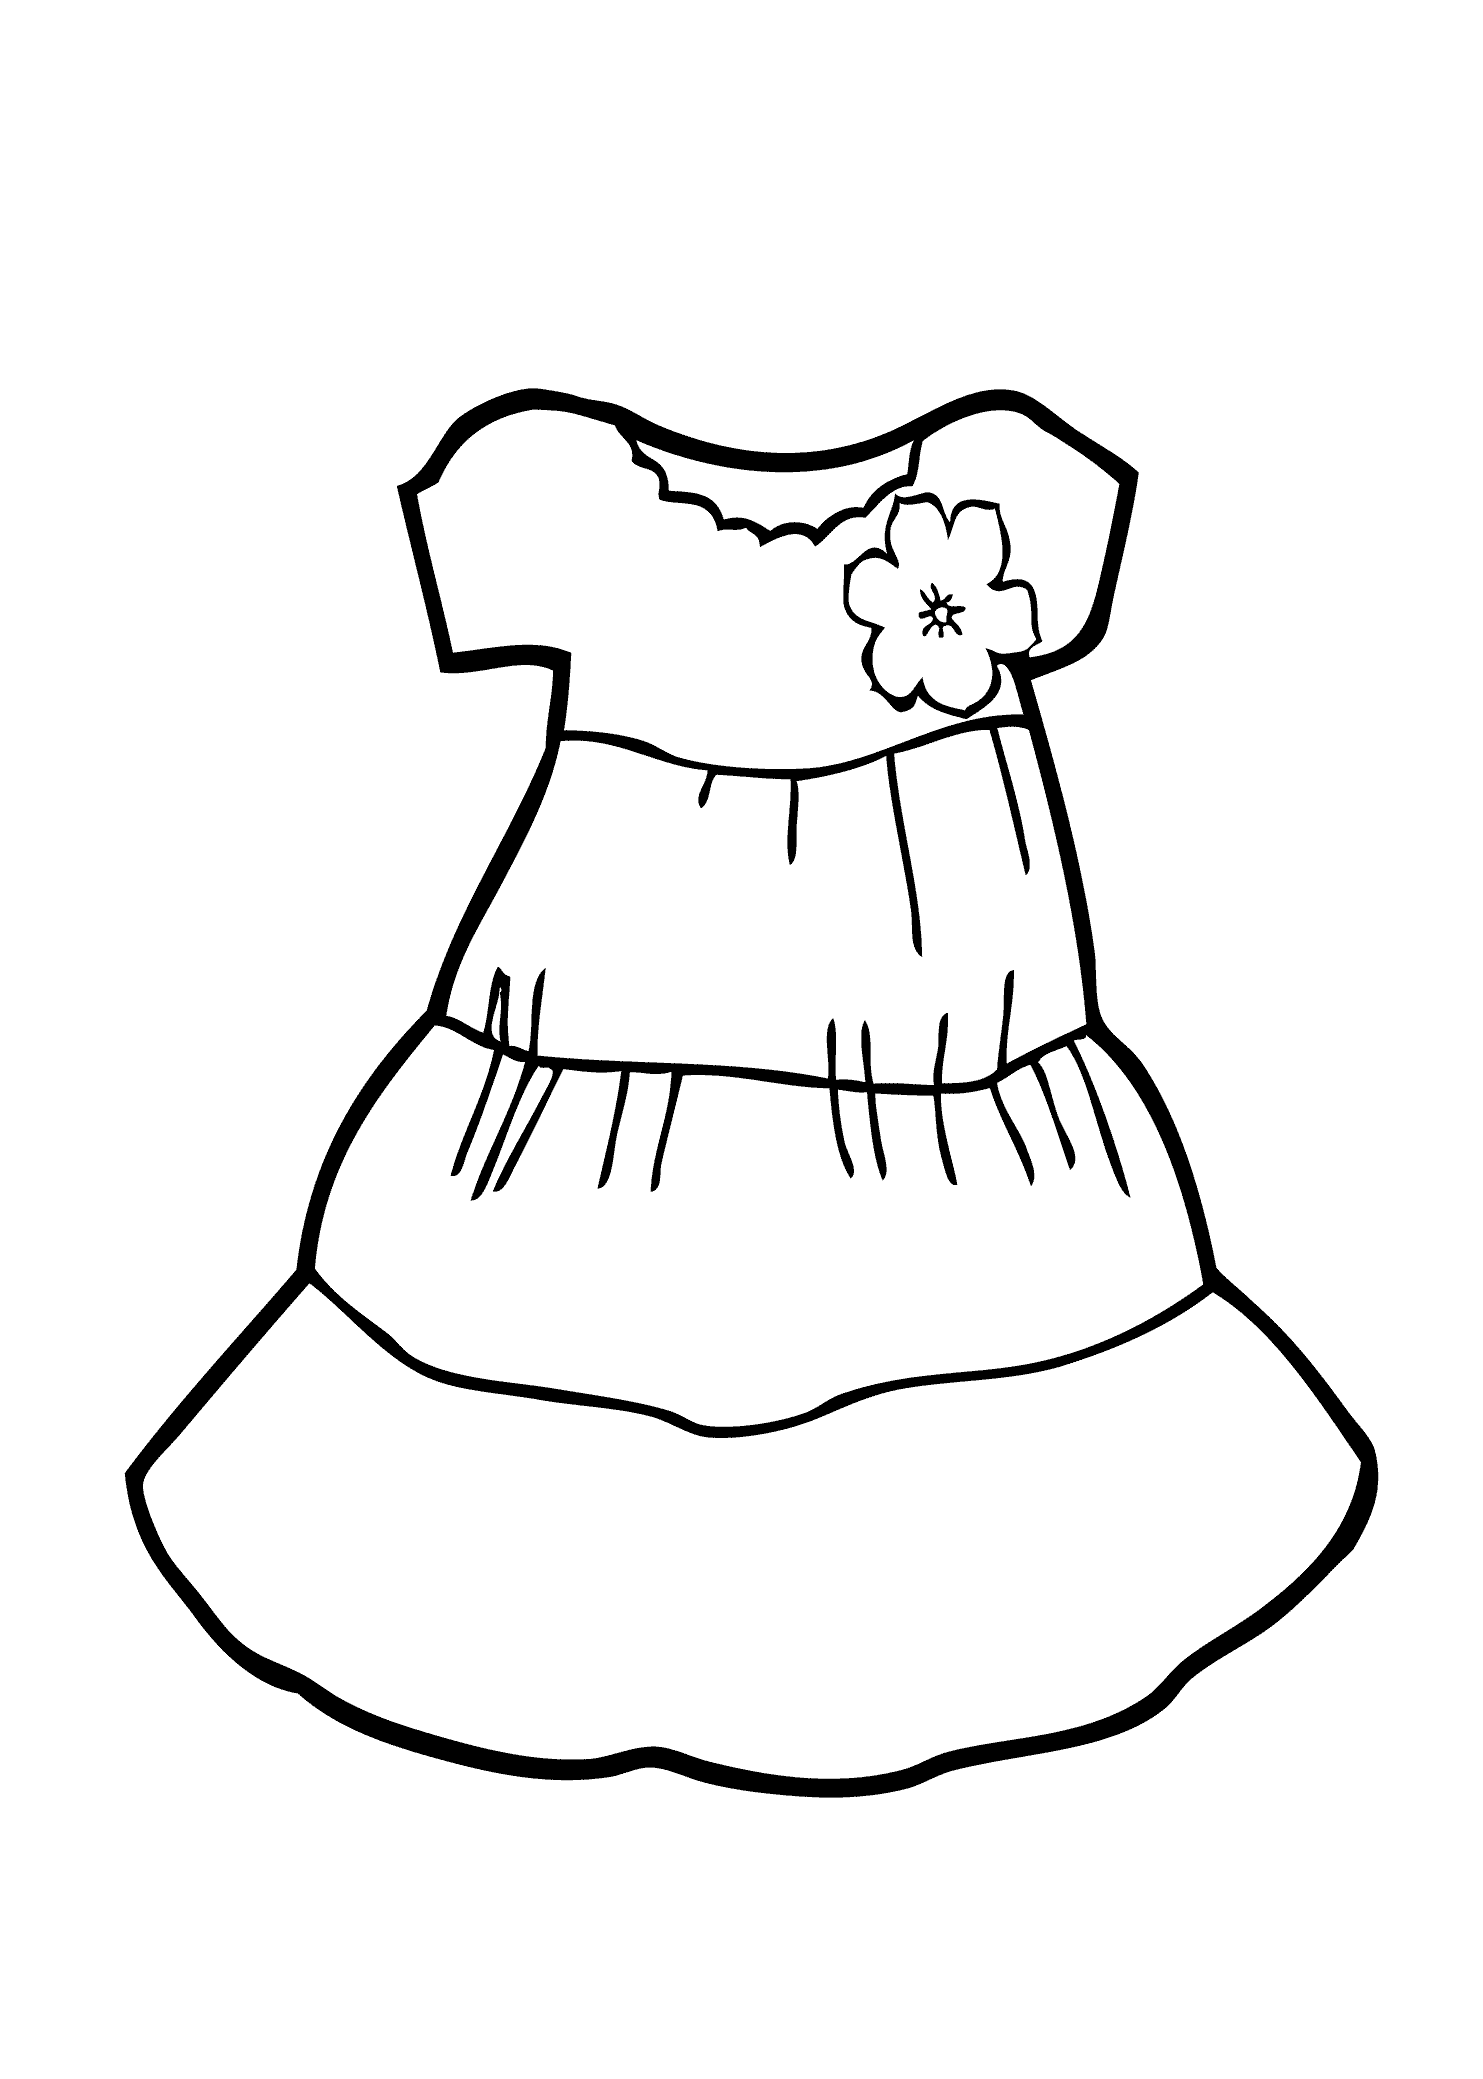 coloring pages of dresses dress coloring pages free printable dress coloring pages dresses pages coloring of 